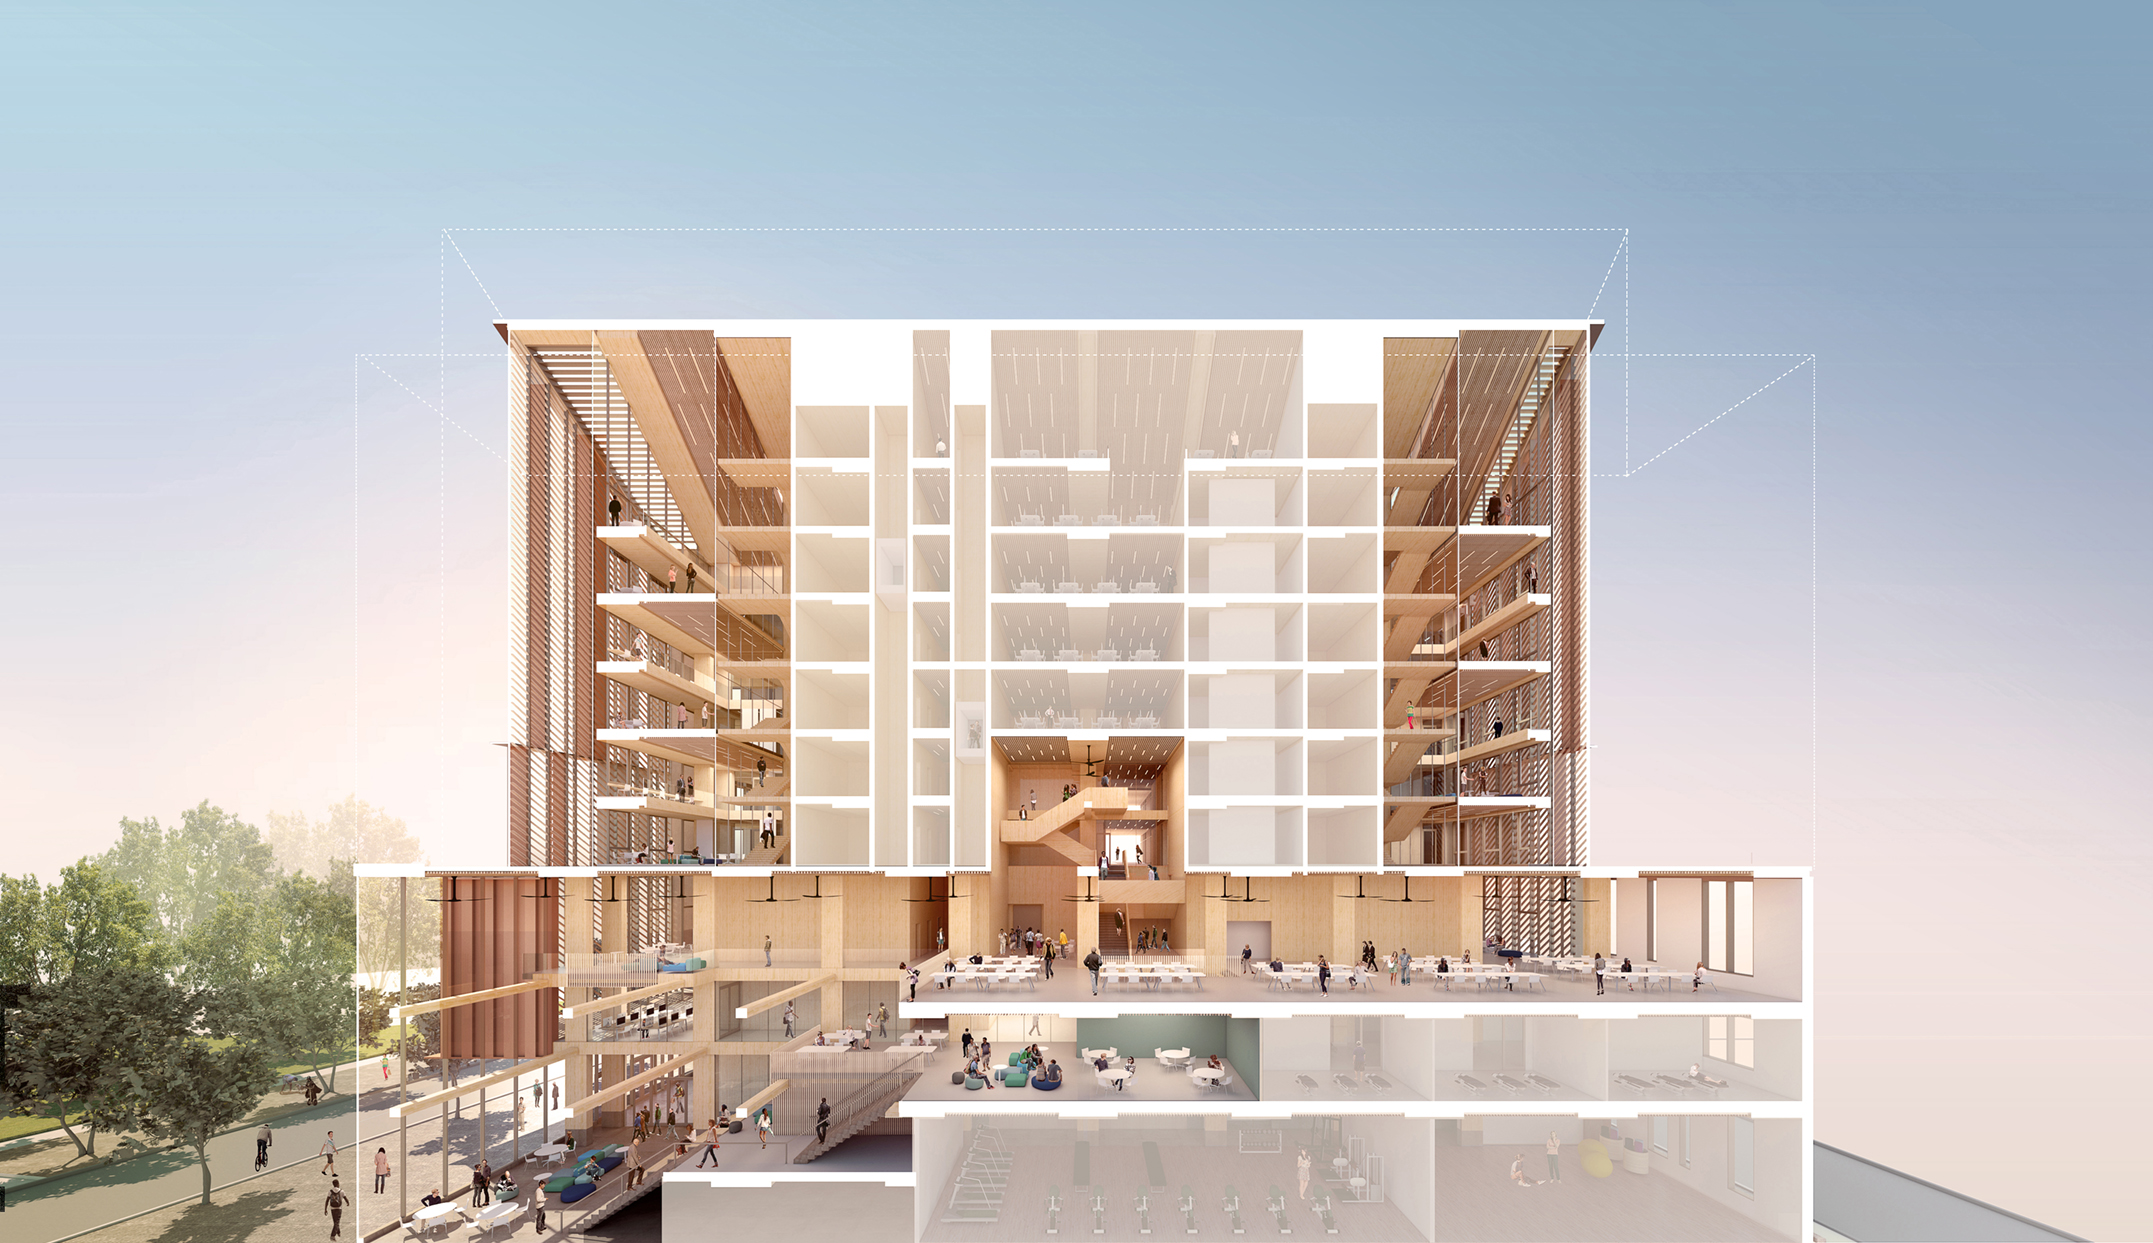 http://mtarch.com/projects/george-brown-tall-wood-building-competition/